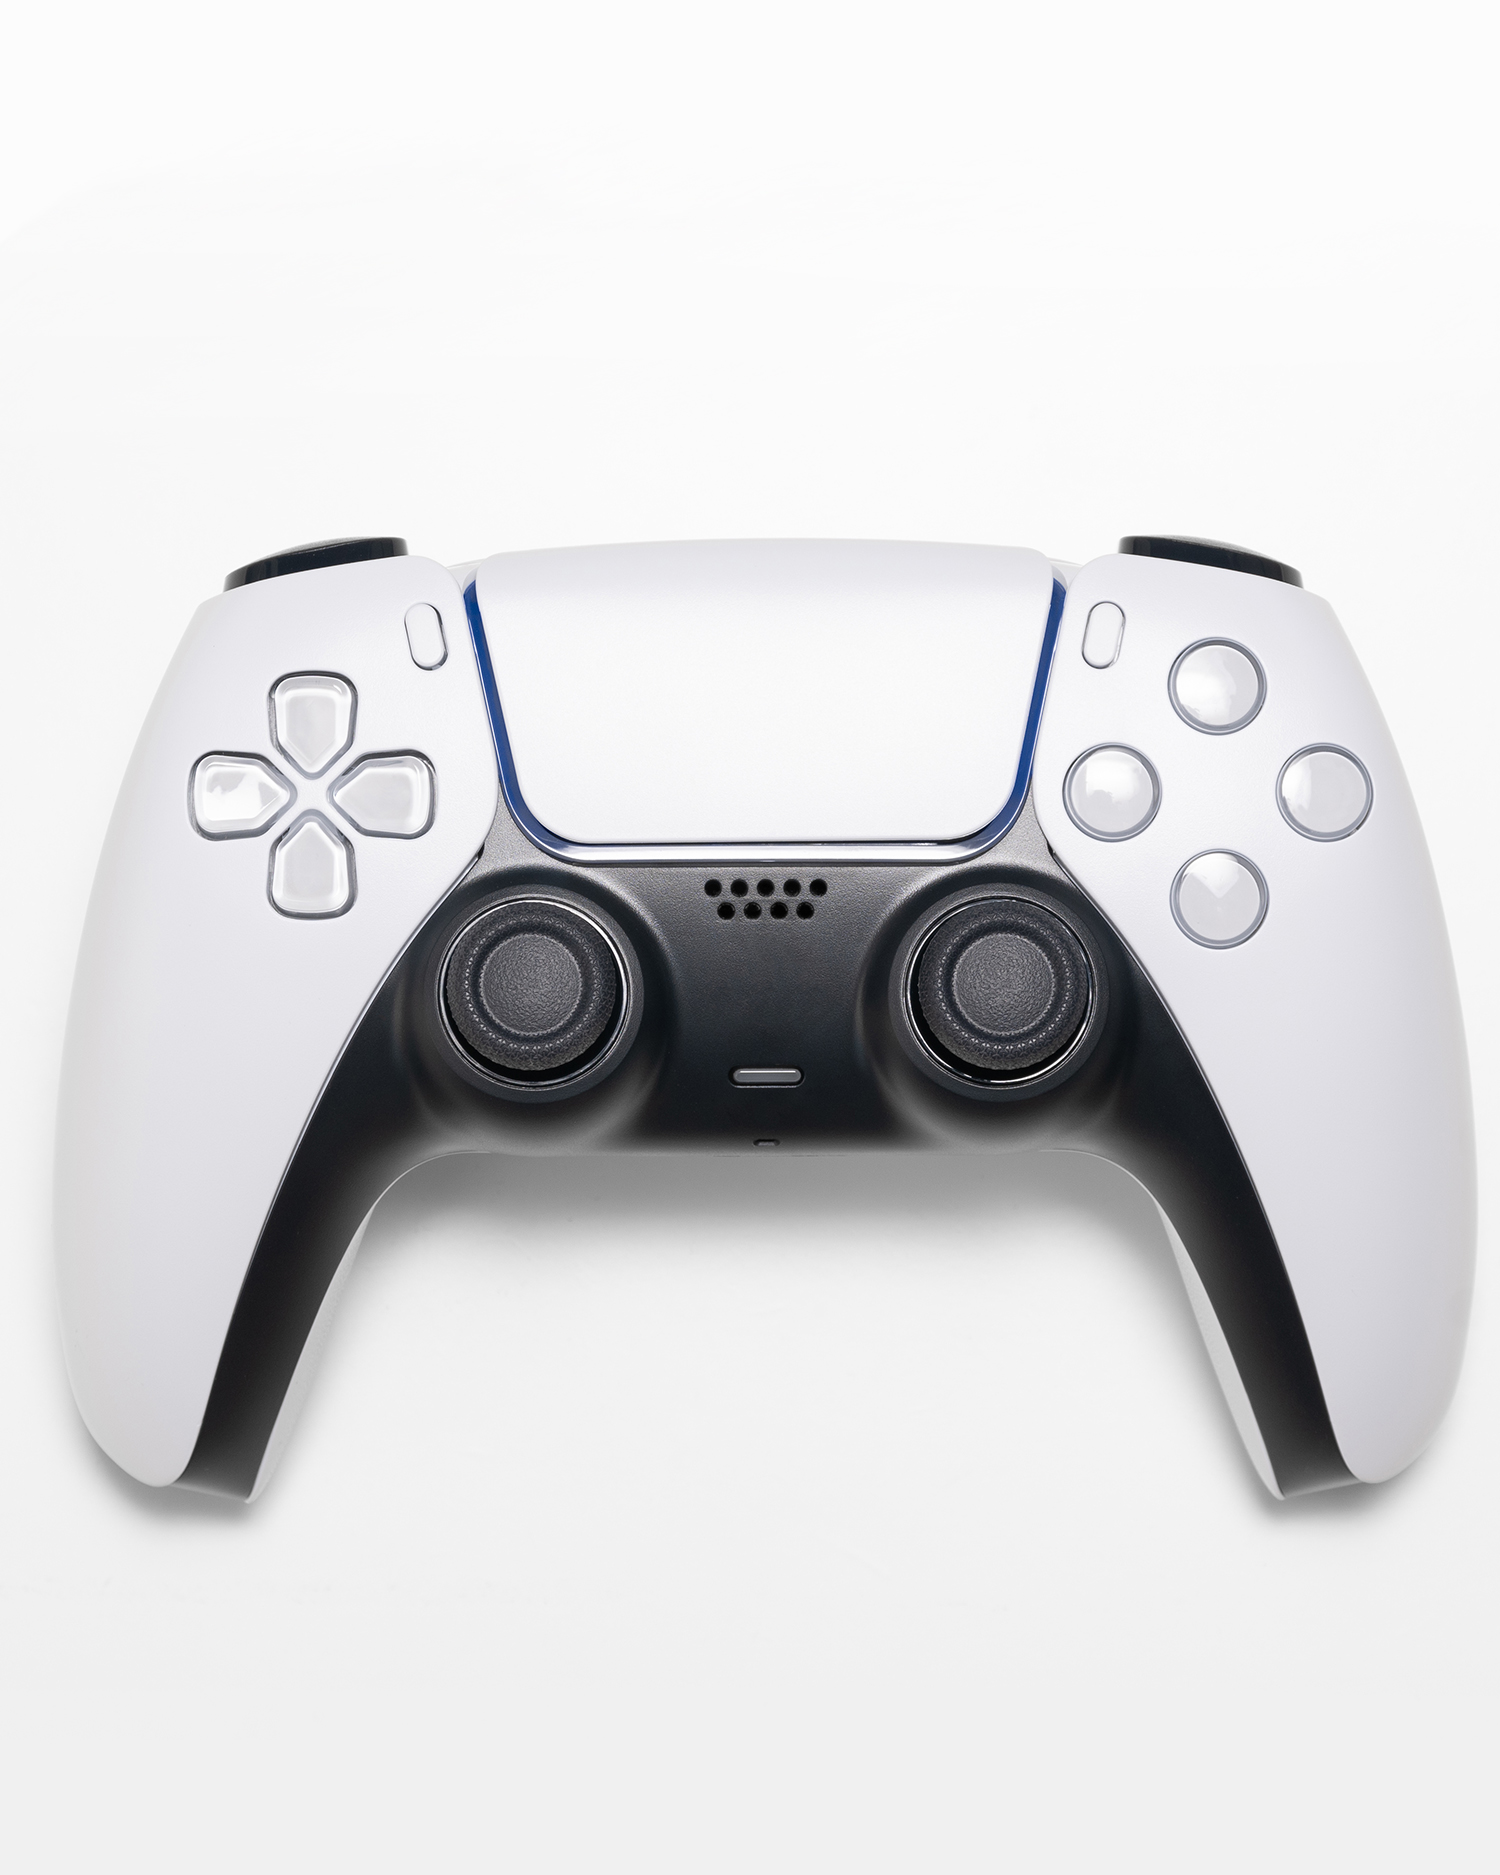 Demo product electronics gaming controller white